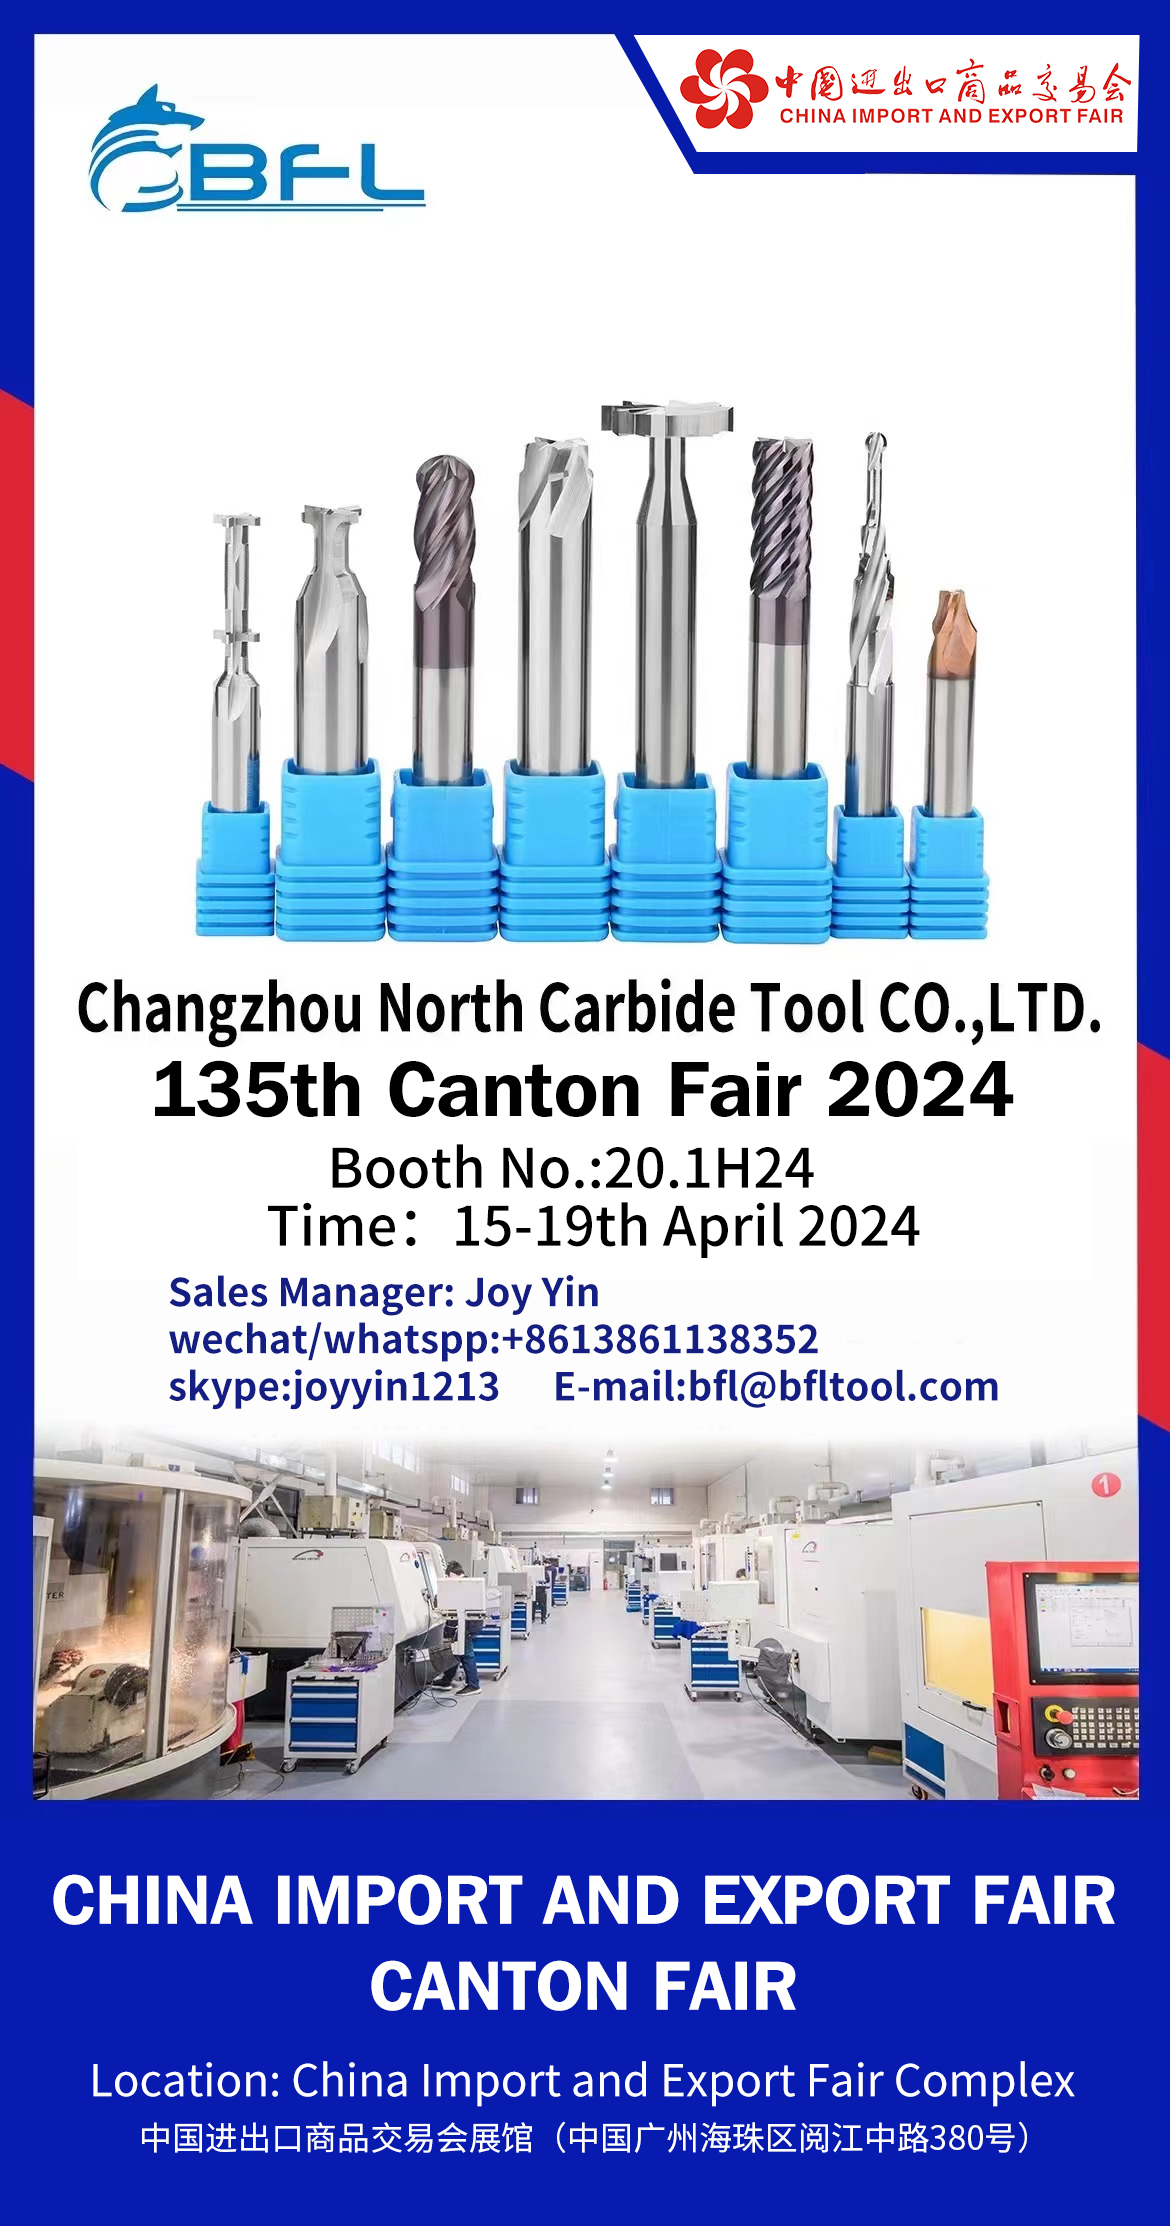 Welcome new and existing customers to visit our booth at the Canton Fair.